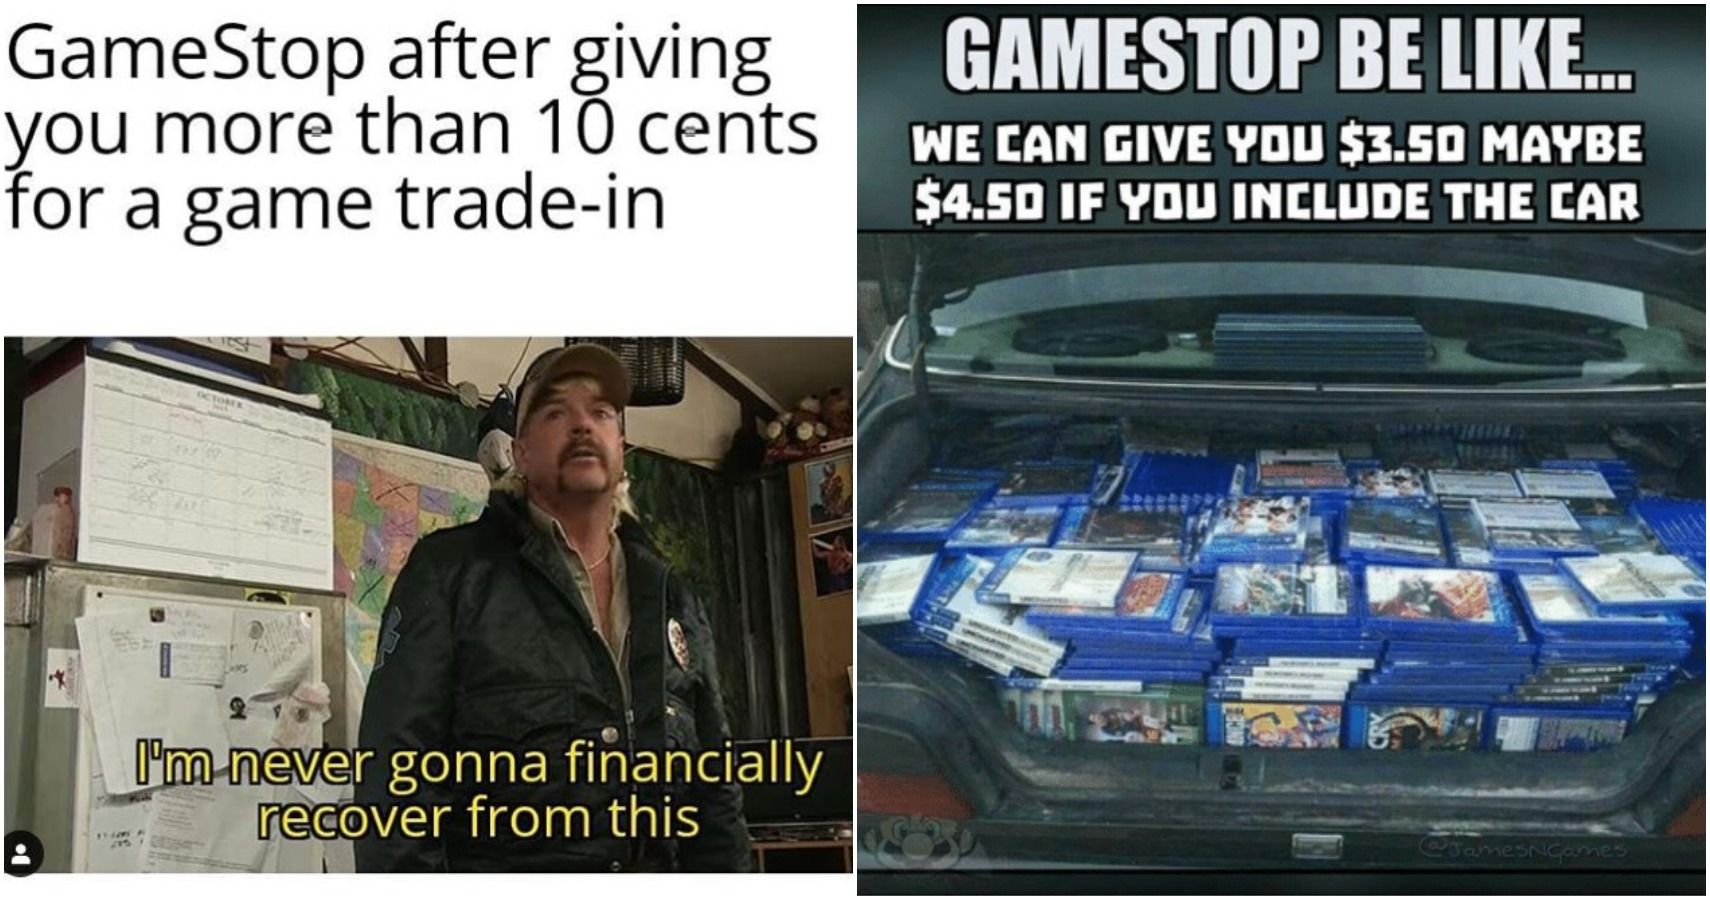 Gamestop Meme / What Are The Next Five Meme Stocks After ...